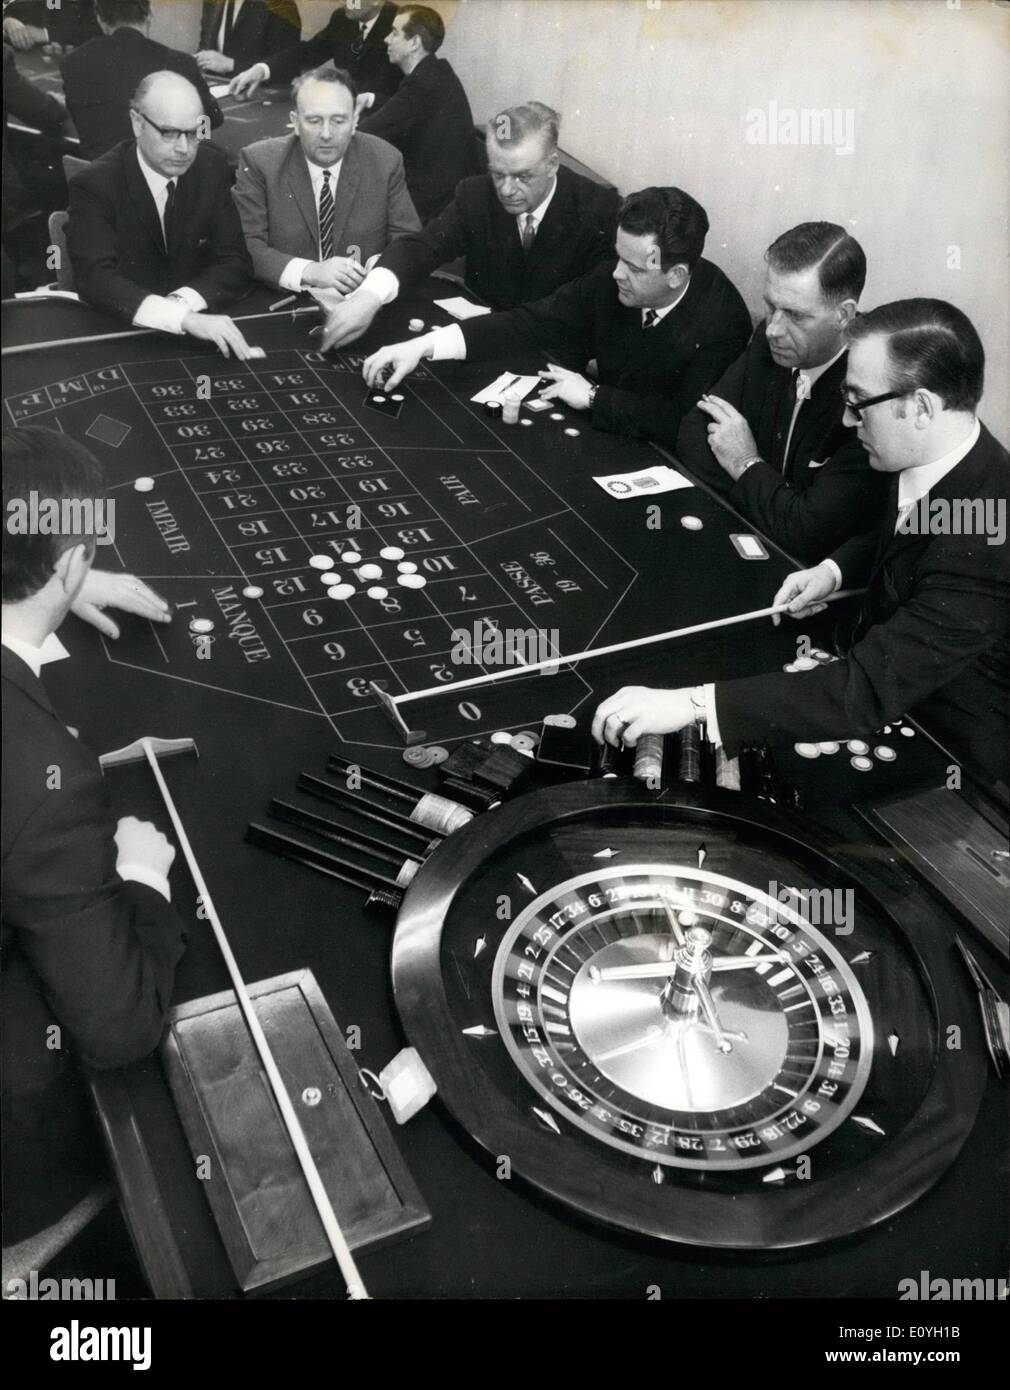 May 05, 1970 - Gaming board inspectorates training school at Leyton High road: A course for 21 gaming inspectors is now in progress at Leyton, East London. The object of the inspectors is to ensure that all regulations regarding gaming are observed in the Gaming Act. The inspectorsare undergoing a 15 week course studying ''Black Jack'' ''Roulette'' and ''Crapa'' etc. Photo shows a game of ''Roulette'' in progress by inspectors on right the ''Croupier'' is Mr. Paul Horne who was former club croupier. Stock Photo